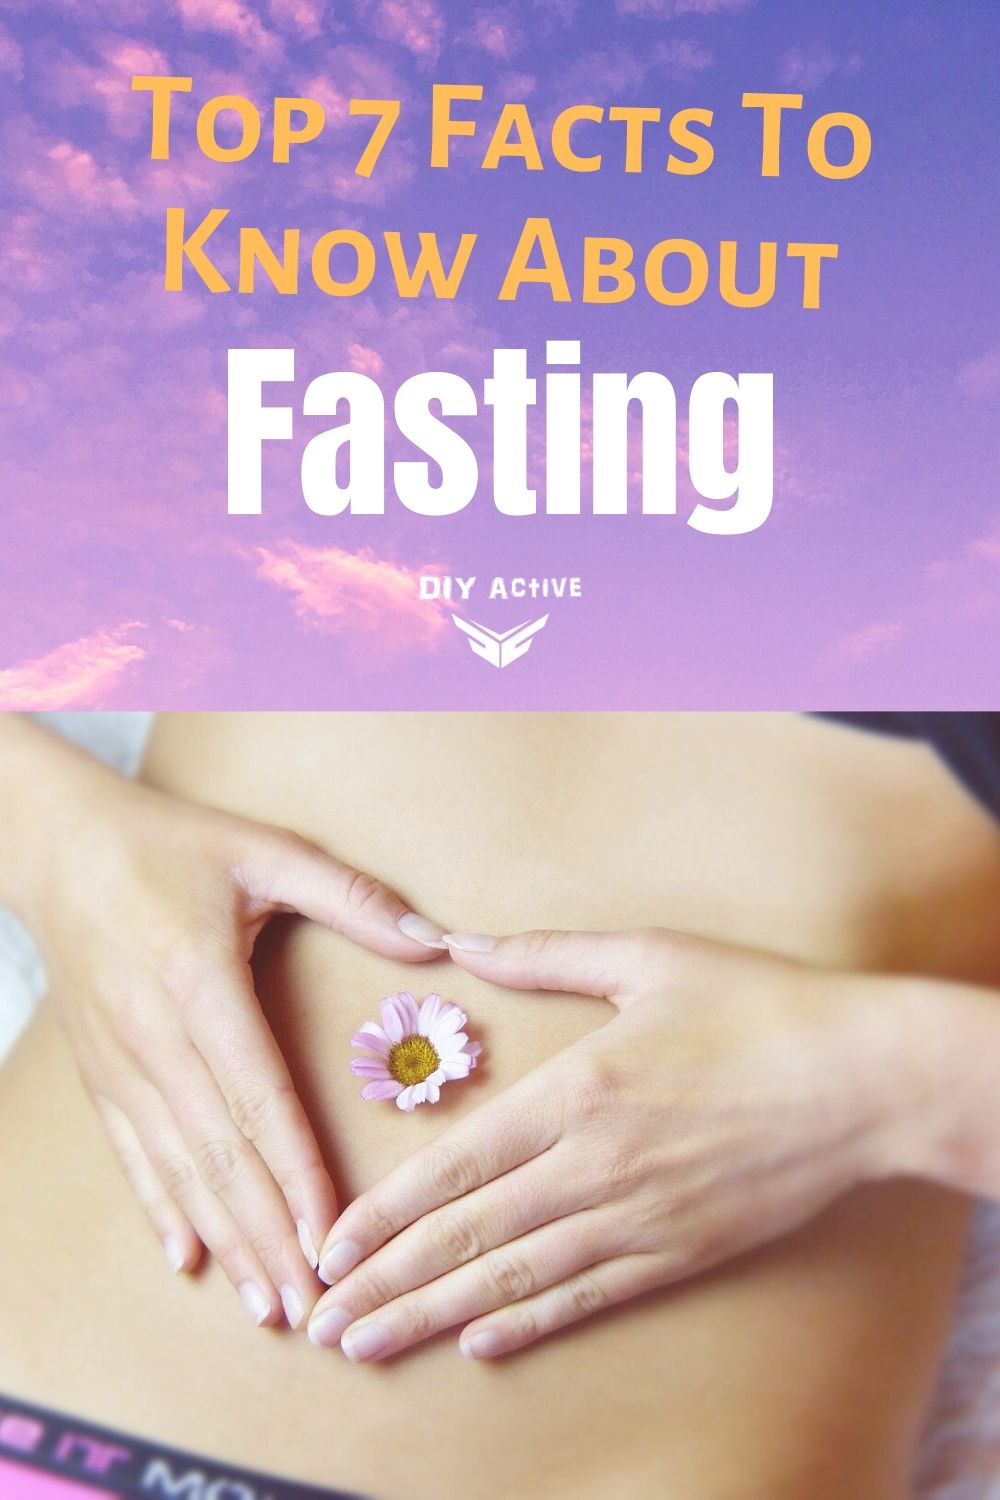 Top 7 Facts To Know About Fasting Starting Today